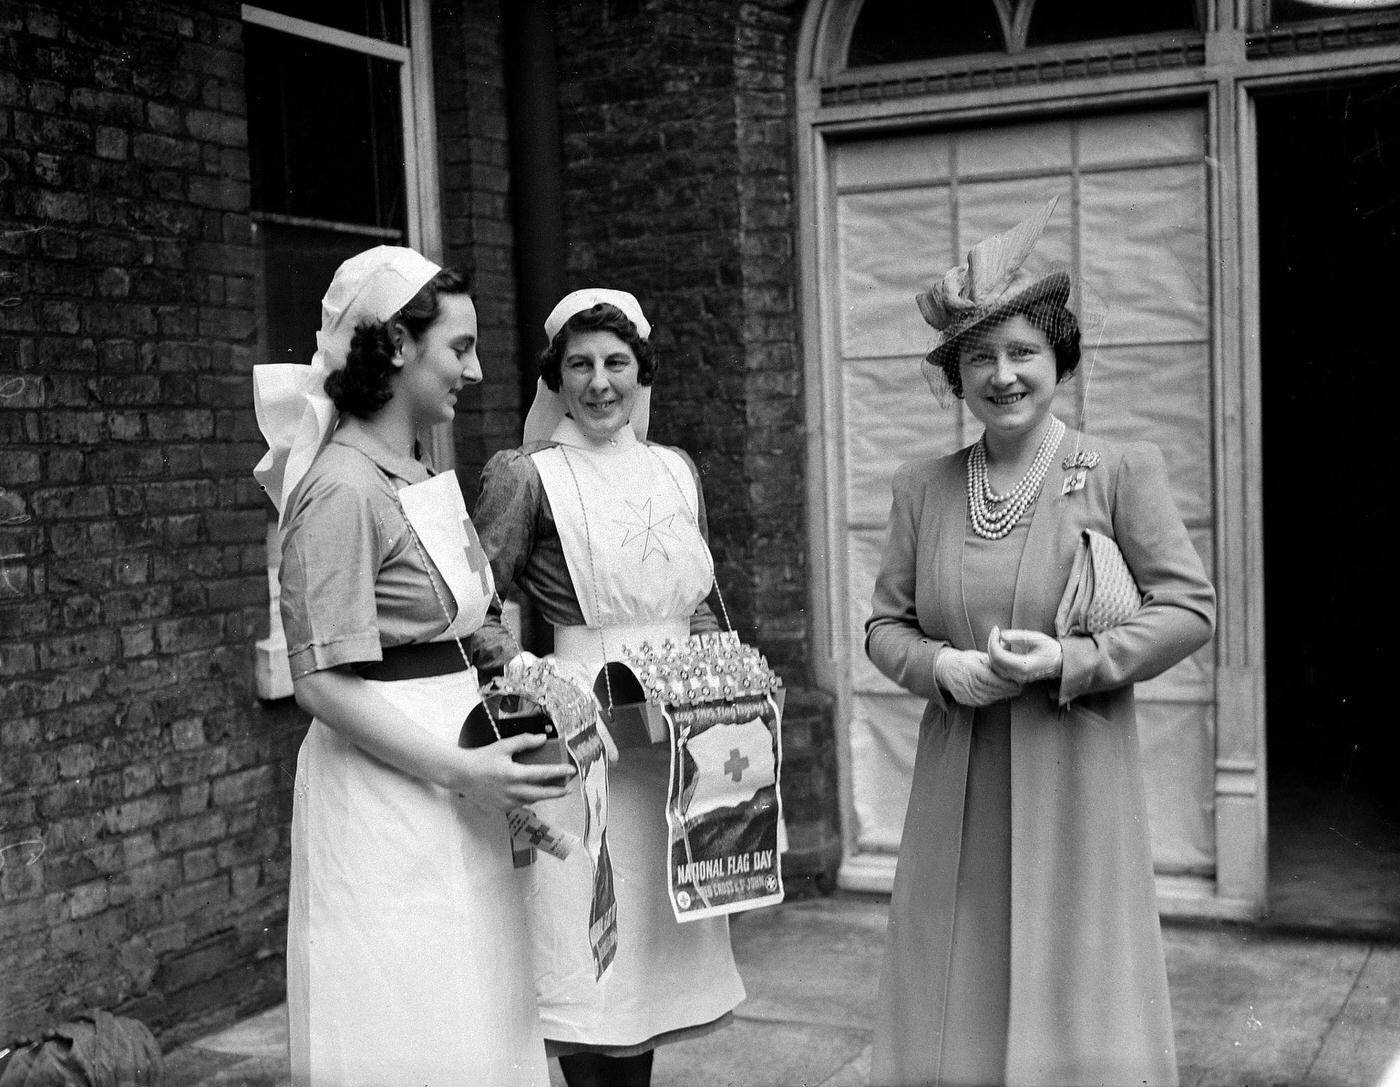 Queen Elizabeth lends her support to National Flag Day with two nurses selling tiny flags.